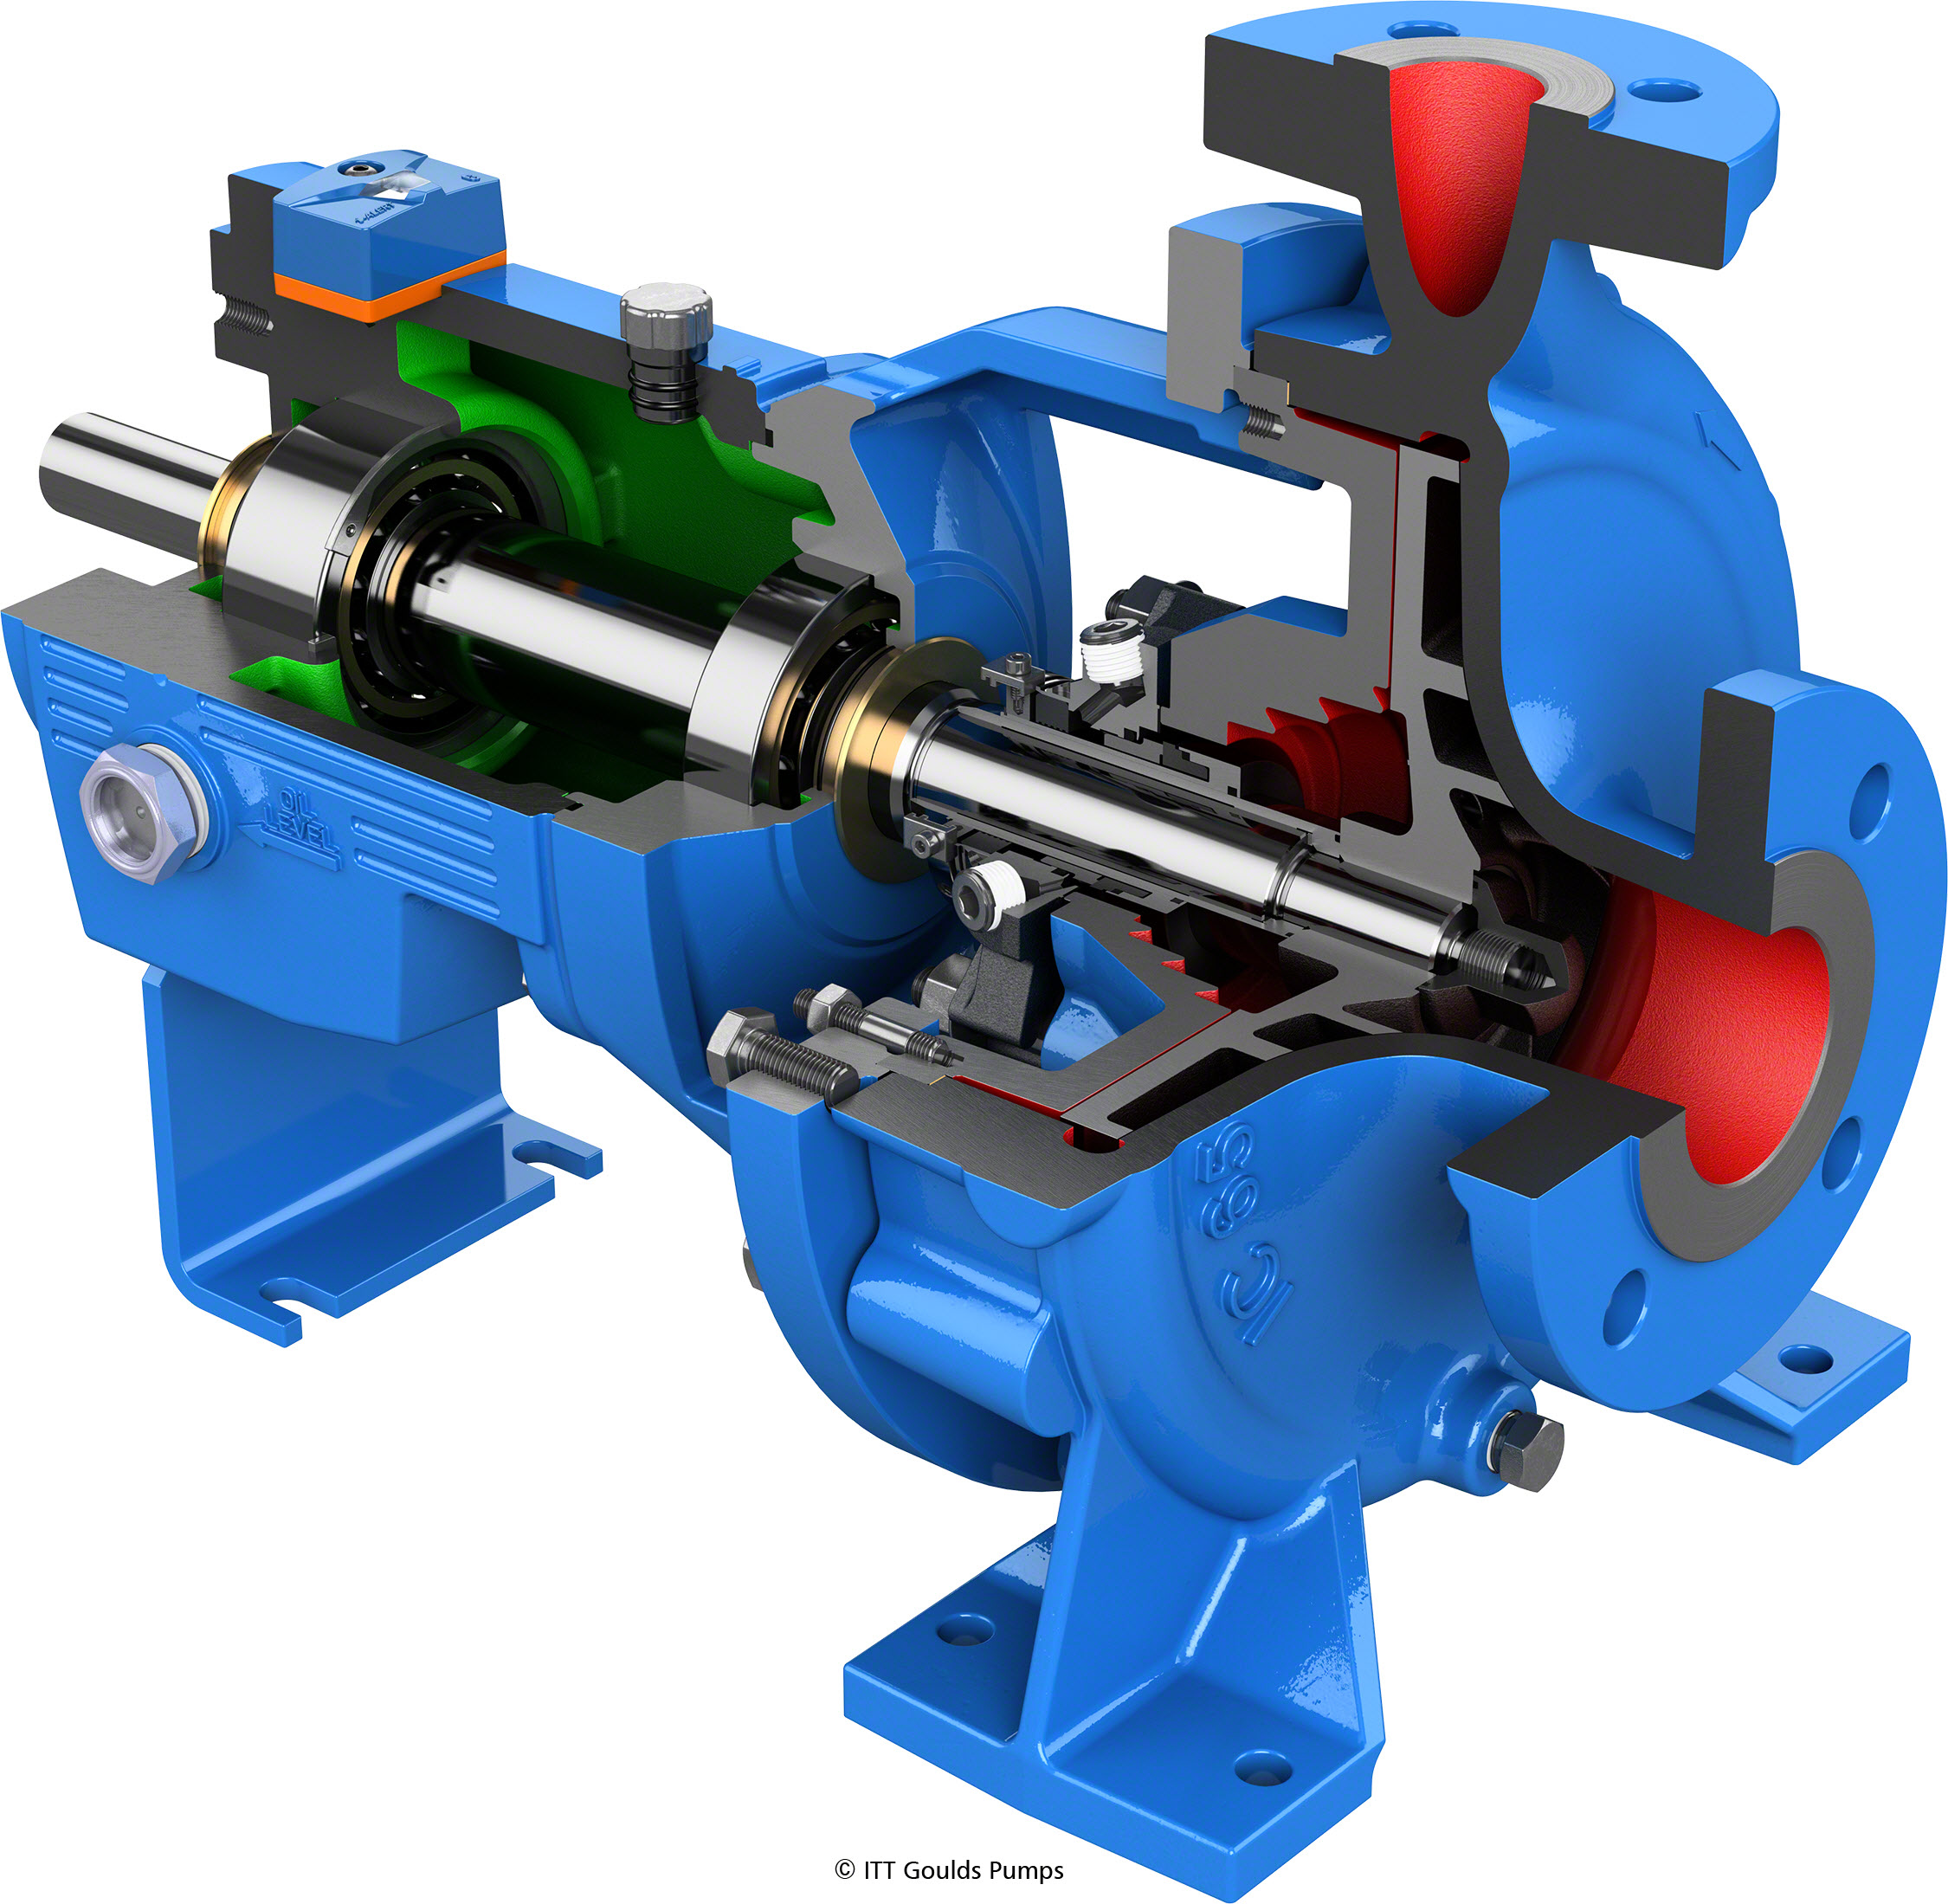 The ITT Goulds Pumps ICO Open Impeller i-FRAME pump series is an ISO process pump with i-ALERT2 intelligent monitoring.